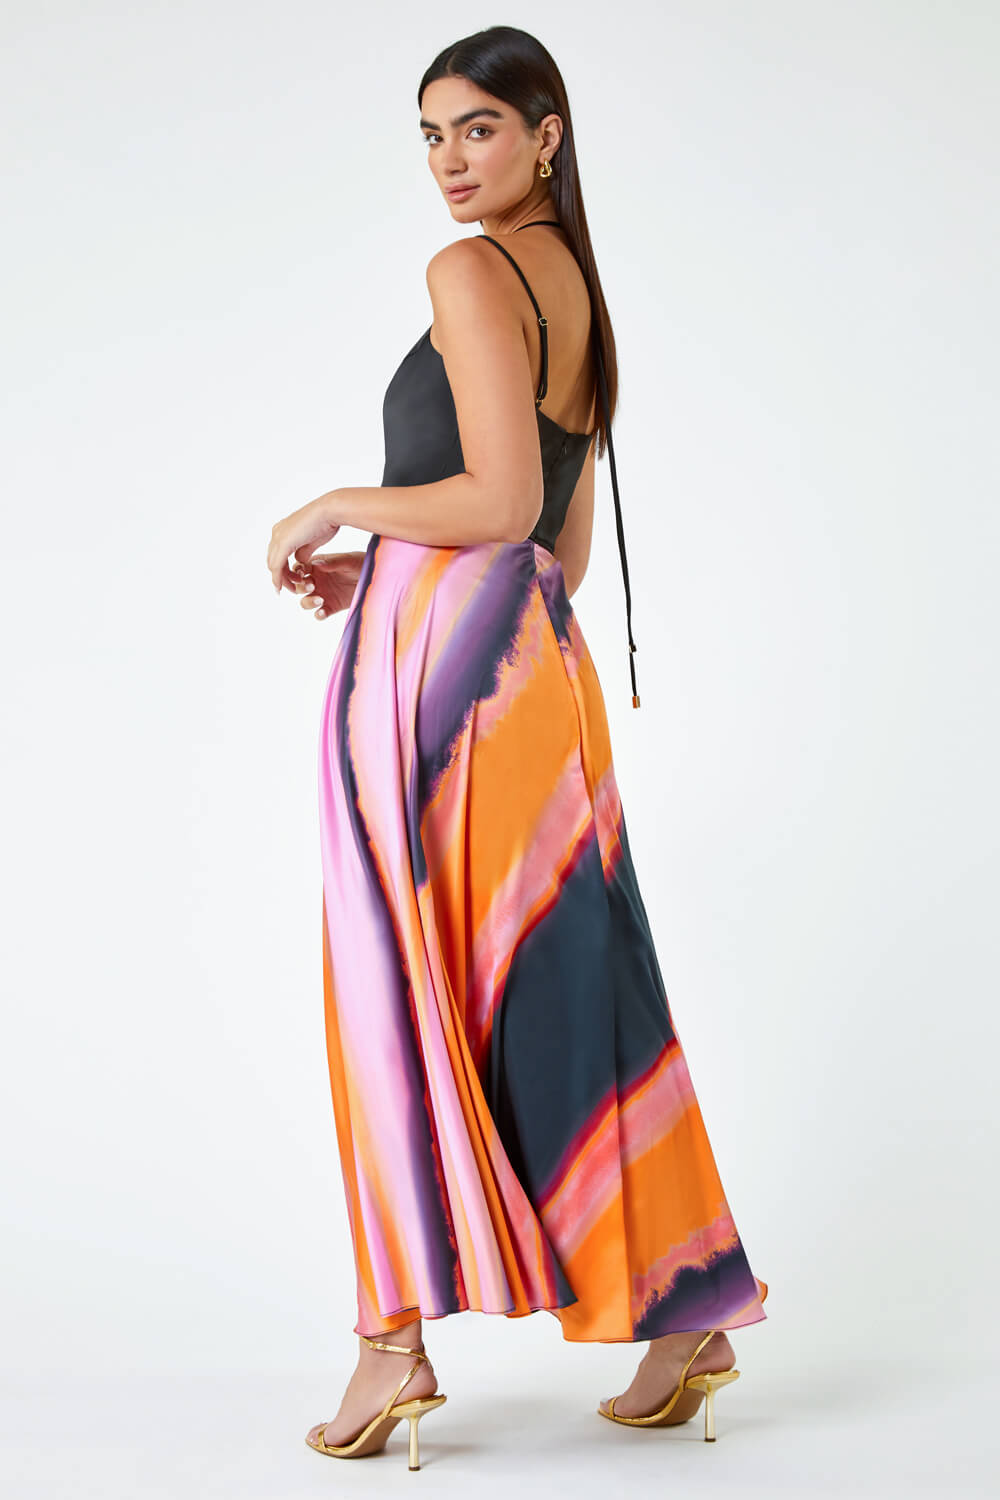 PINK Luxe Colourblock Fit & Flare Maxi Dress, Image 3 of 6